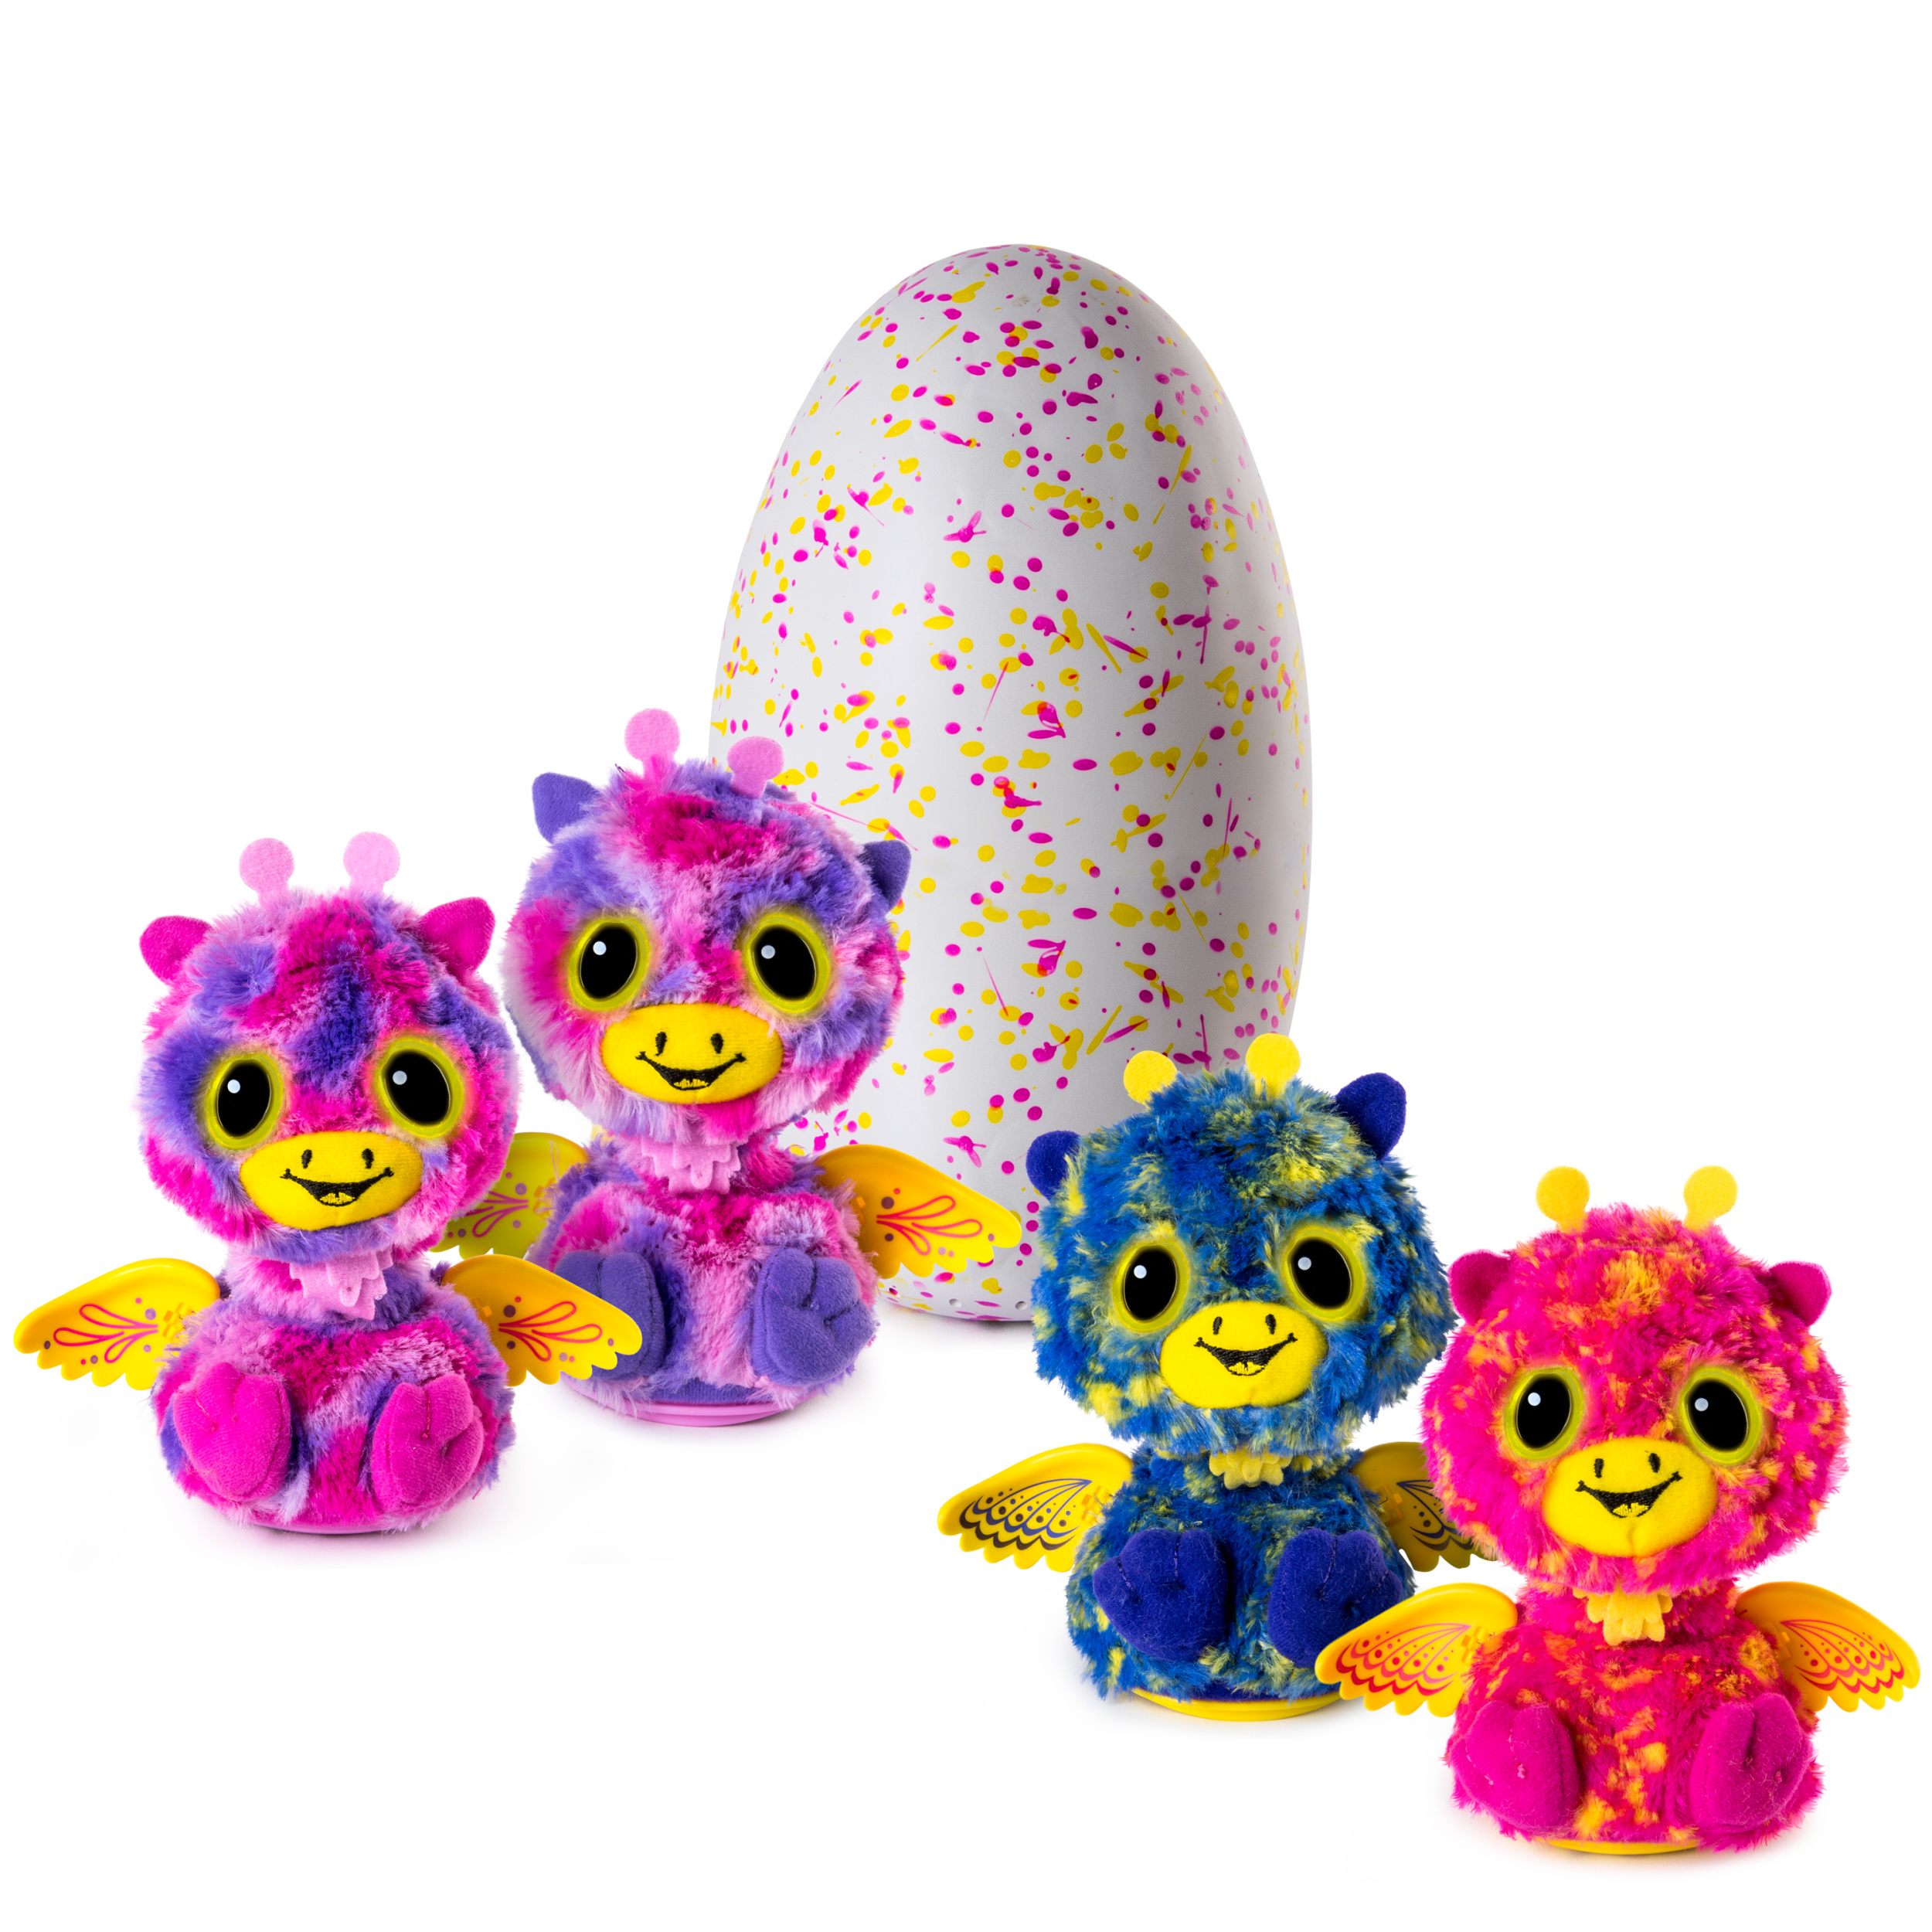 Hatchimals Egg Creature with Surprise Twins - Giraven